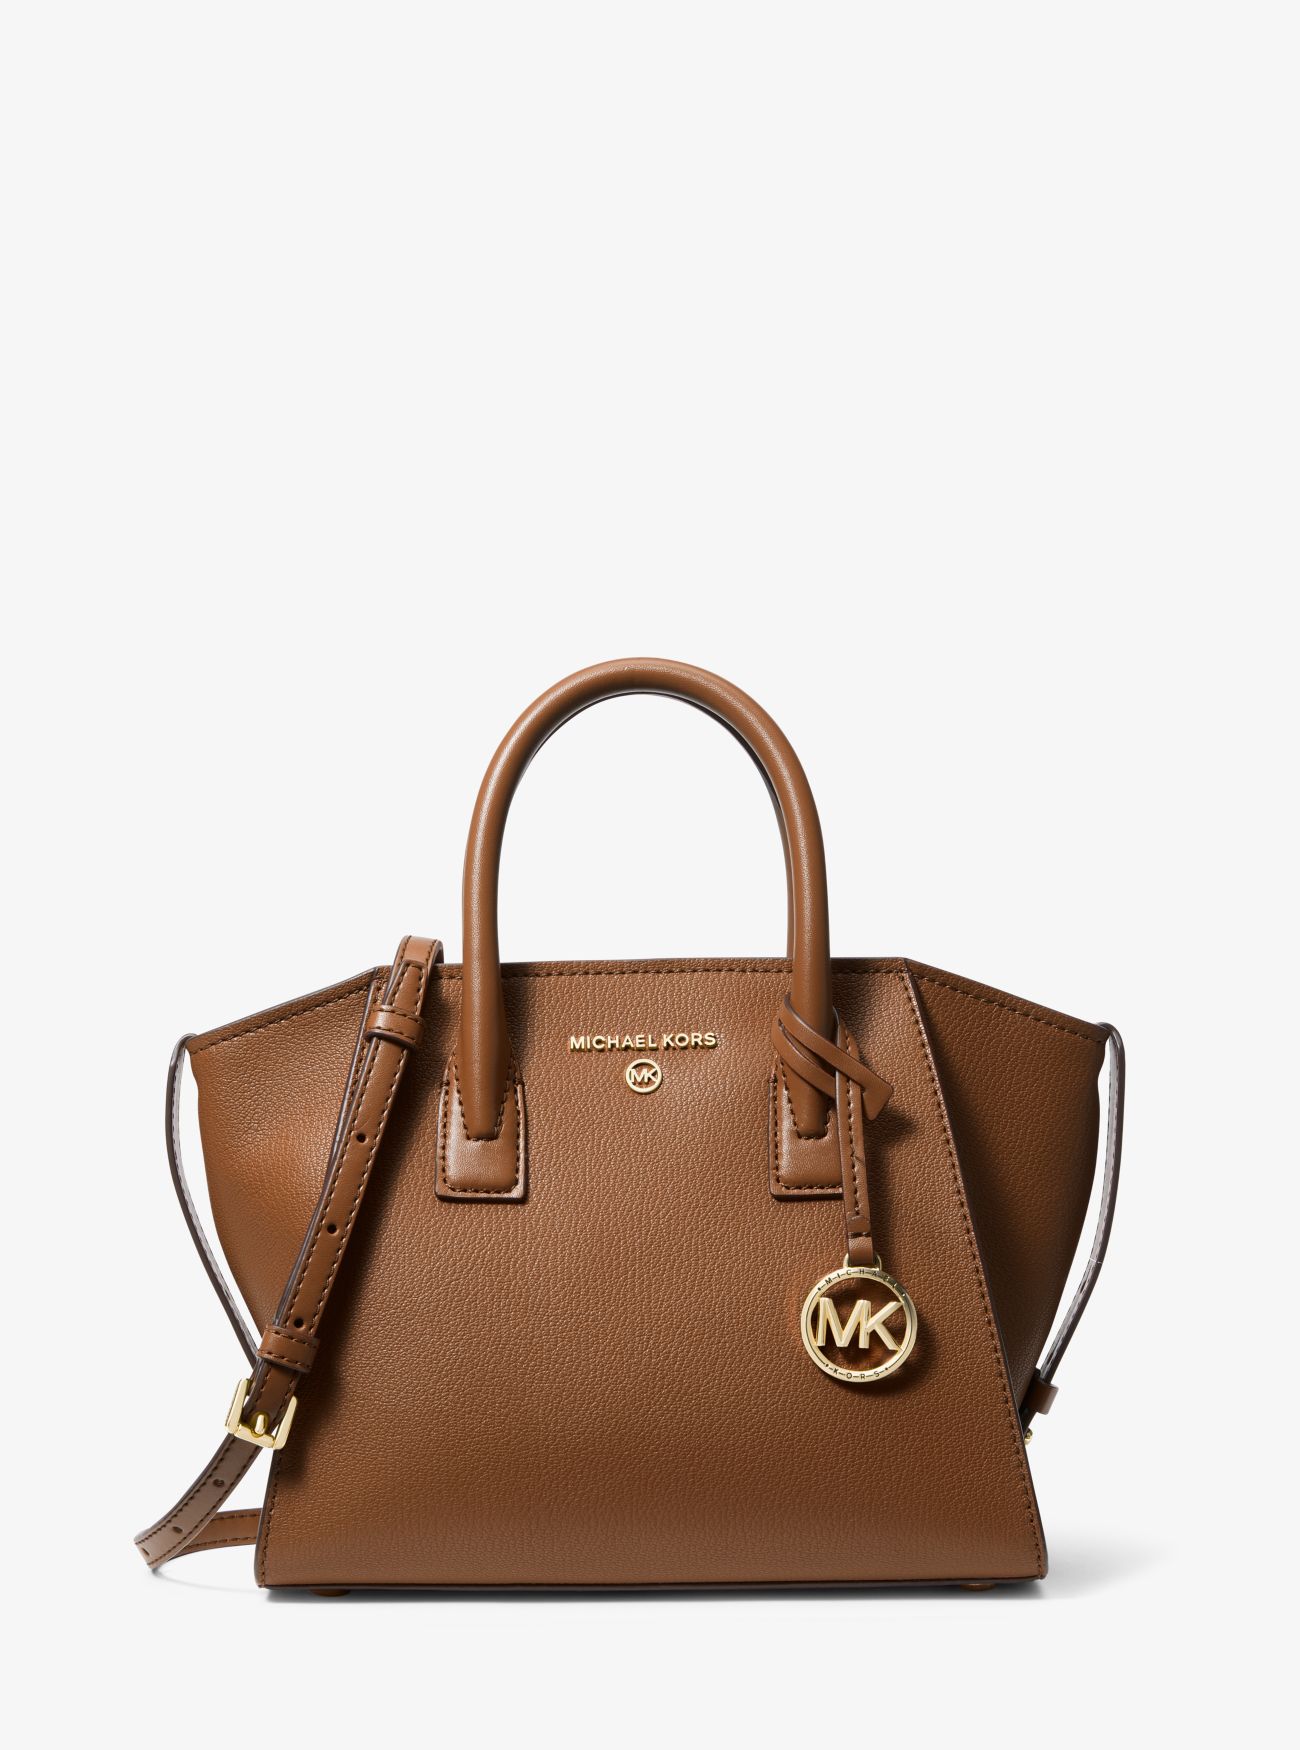 MK Avril Small Leather Top-Zip Satchel - Luggage Brown - Michael Kors